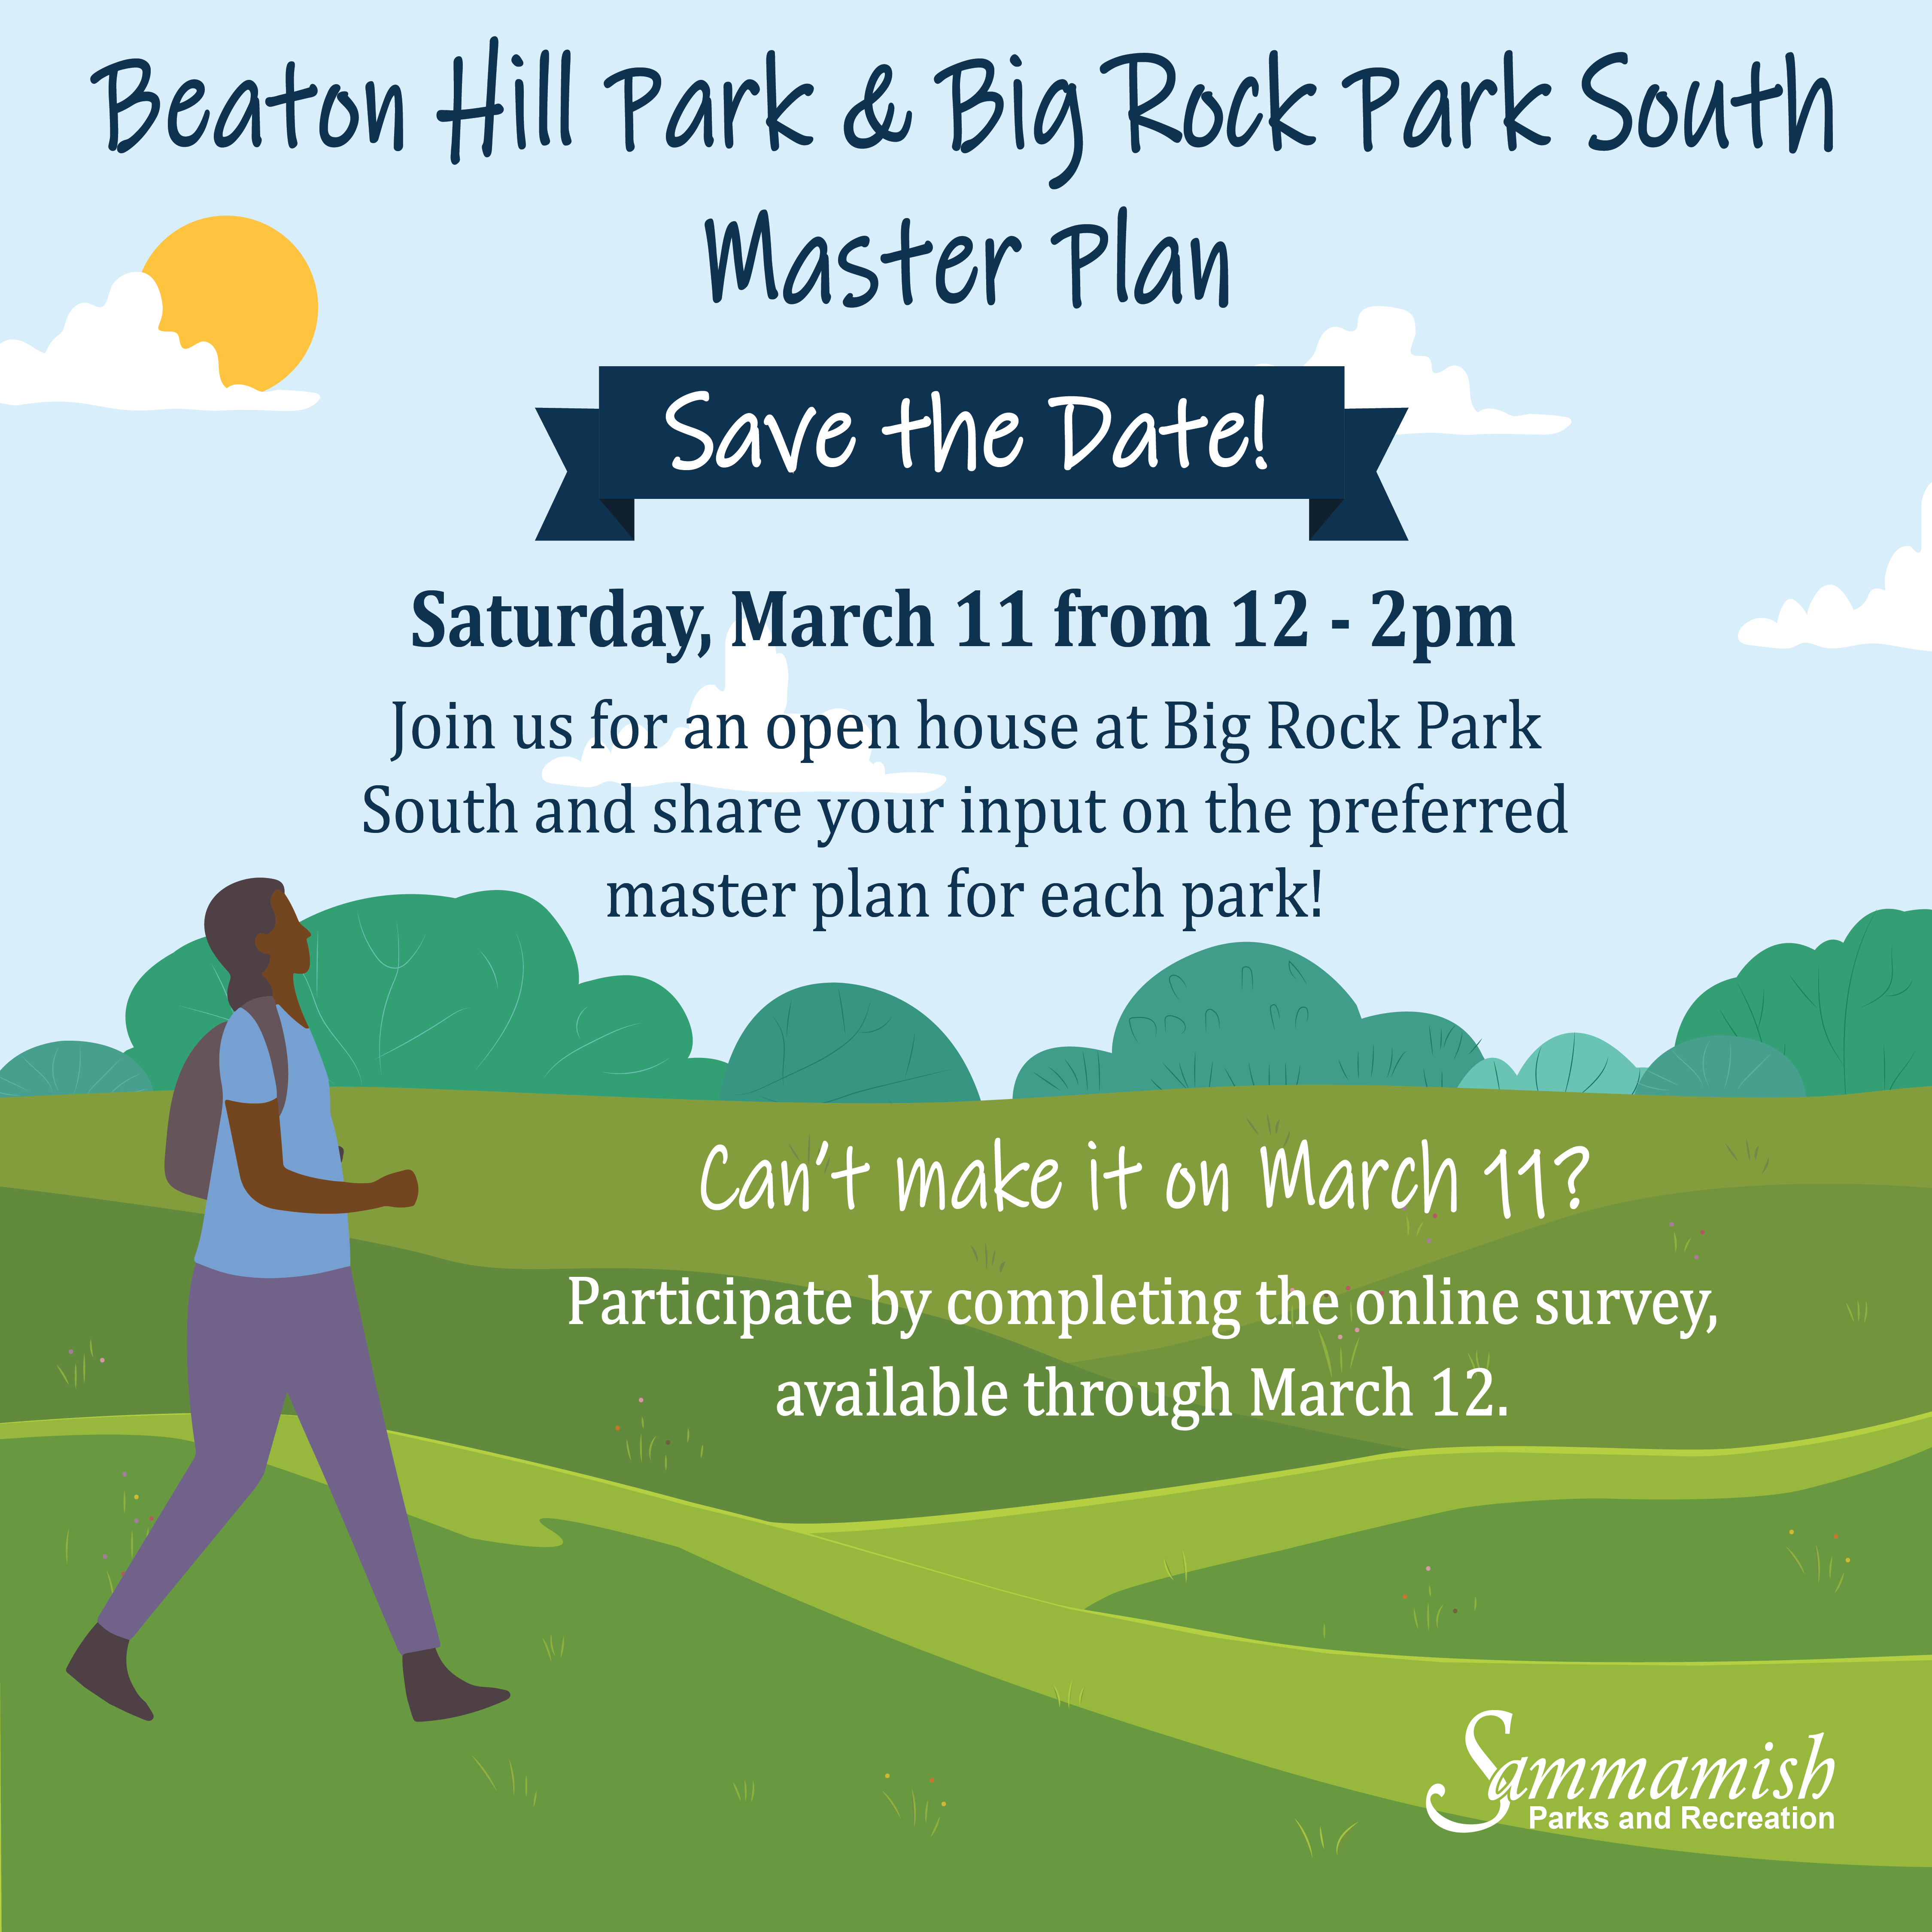 Beaton Hill Park and Big Rock Park South Master Plan Save the Date. 